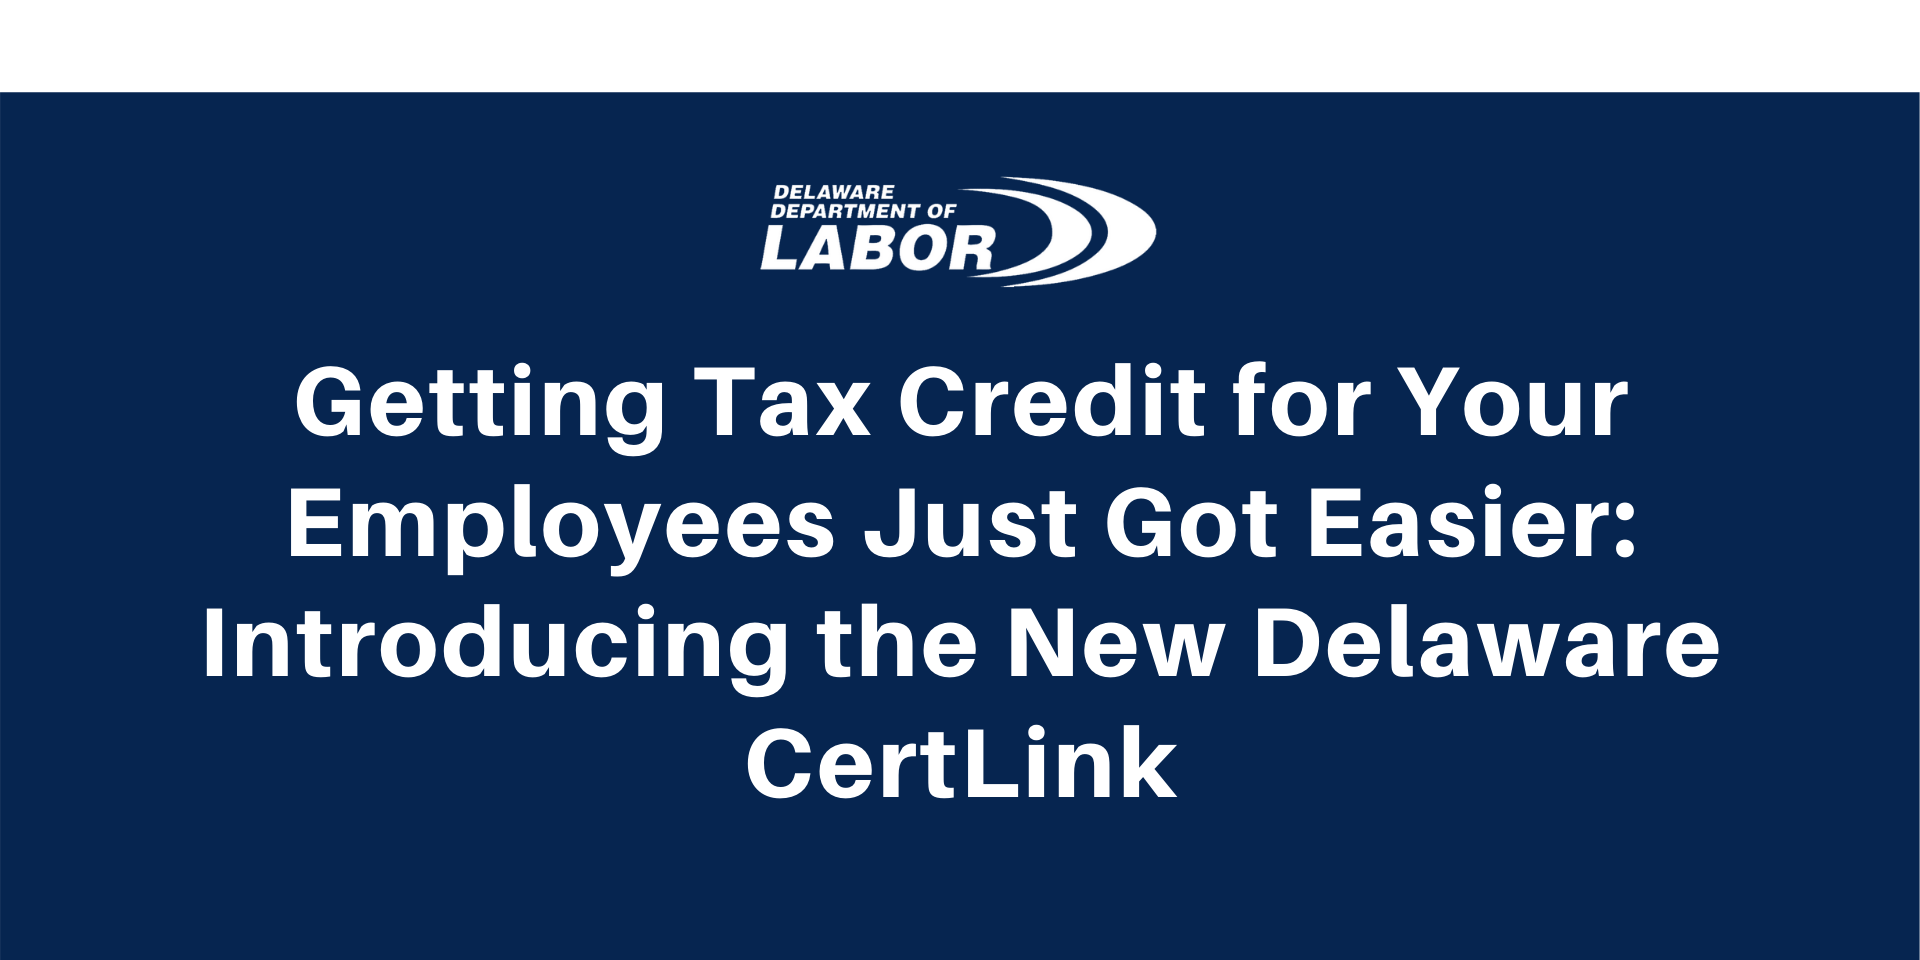 Getting Tax Credit for Your Employees Just Got Easier: Introducing the New Delaware CertLink